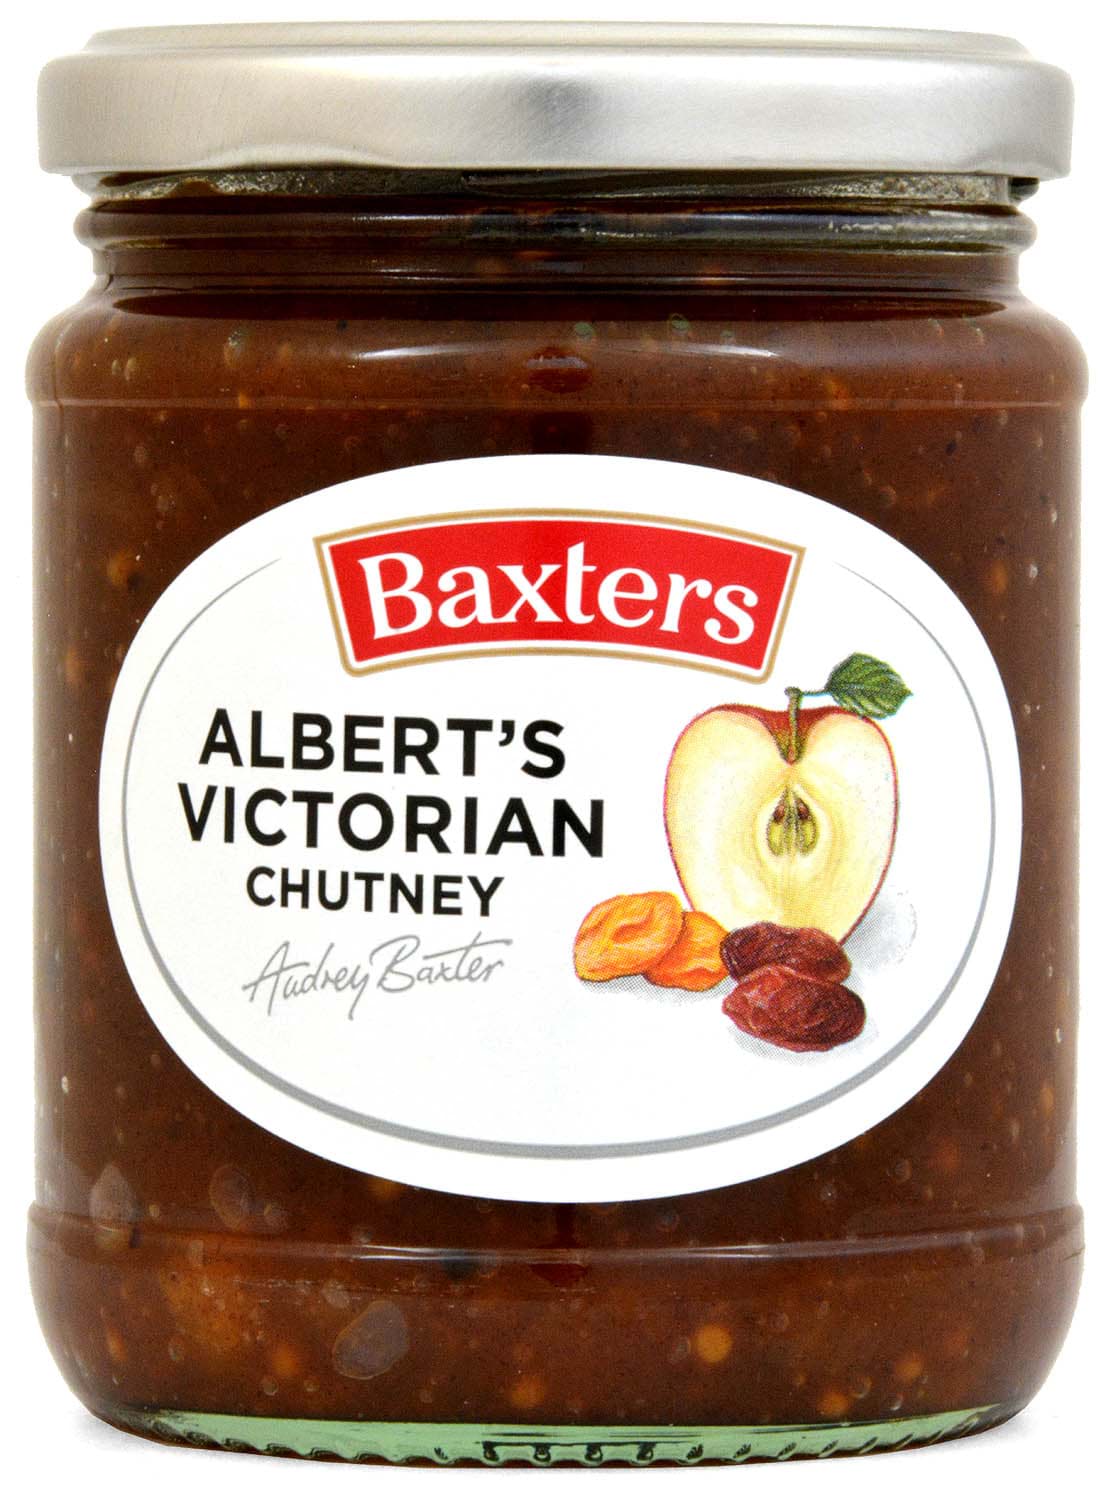 Picture of Alberts Victorian Chutney by Baxters